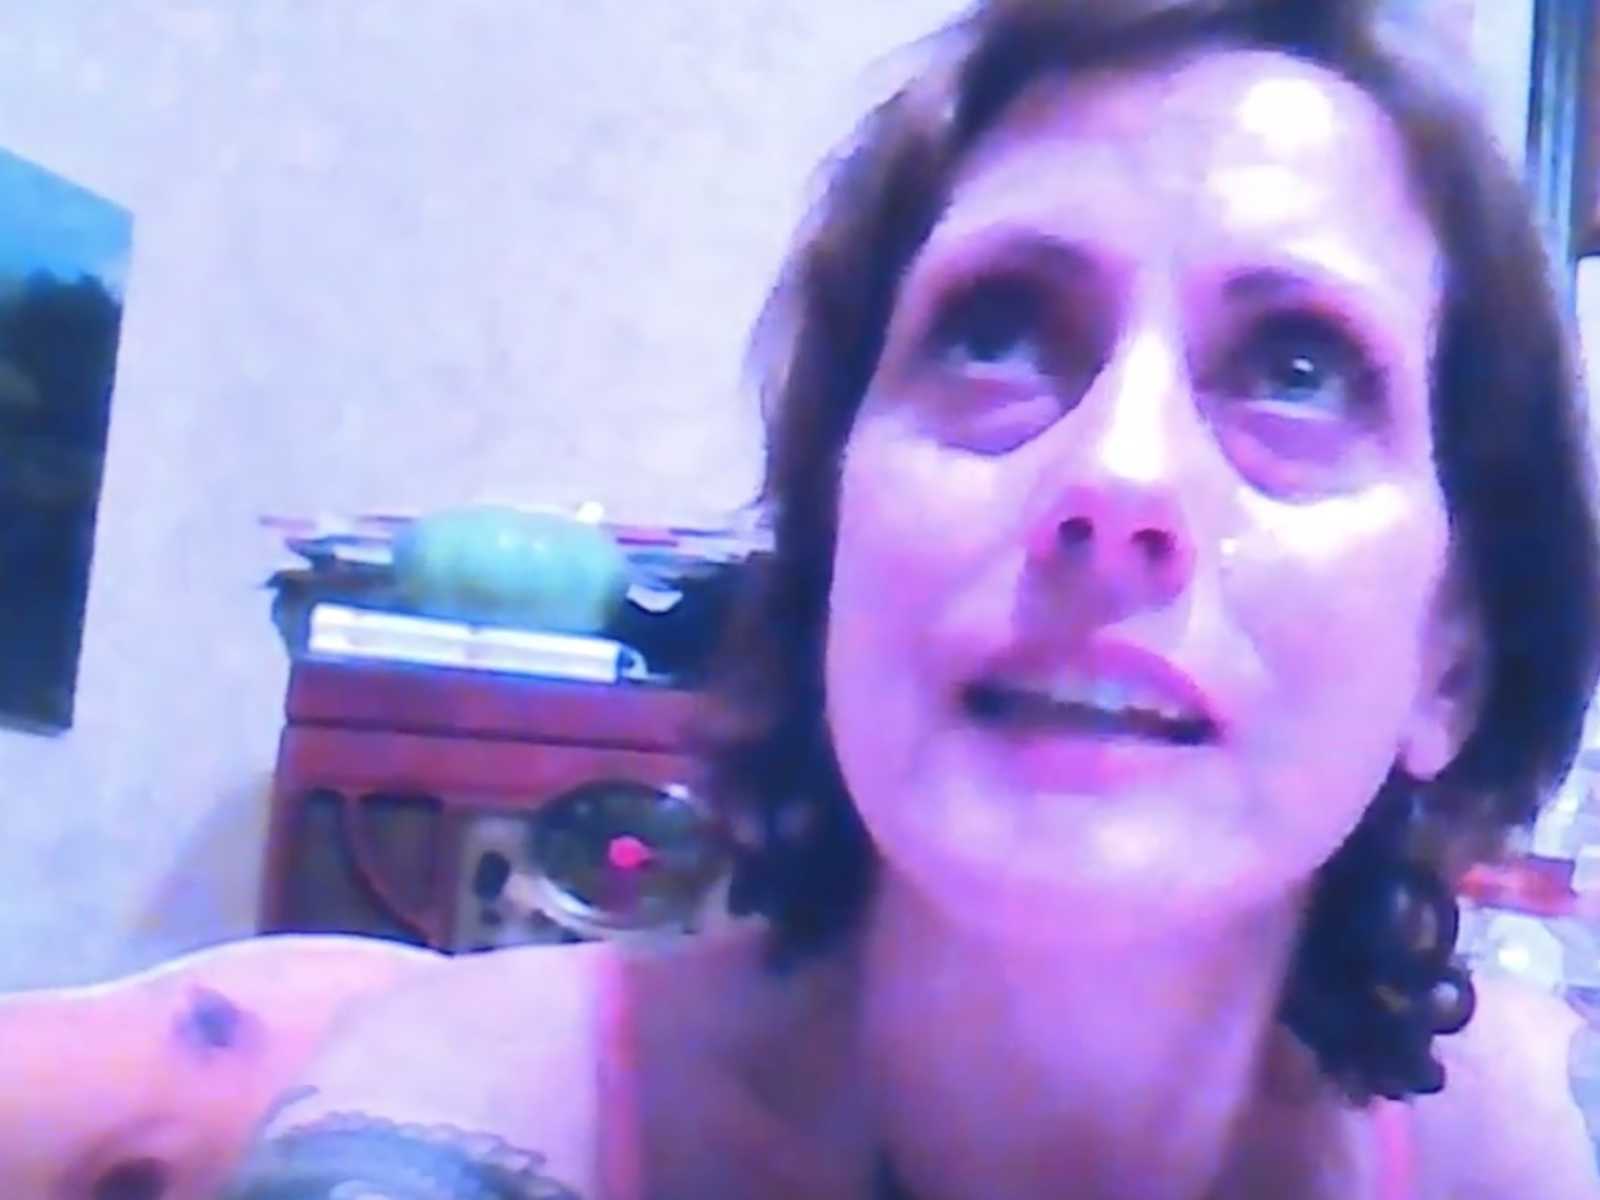 Blurry face of late mother who made video messages for daughter